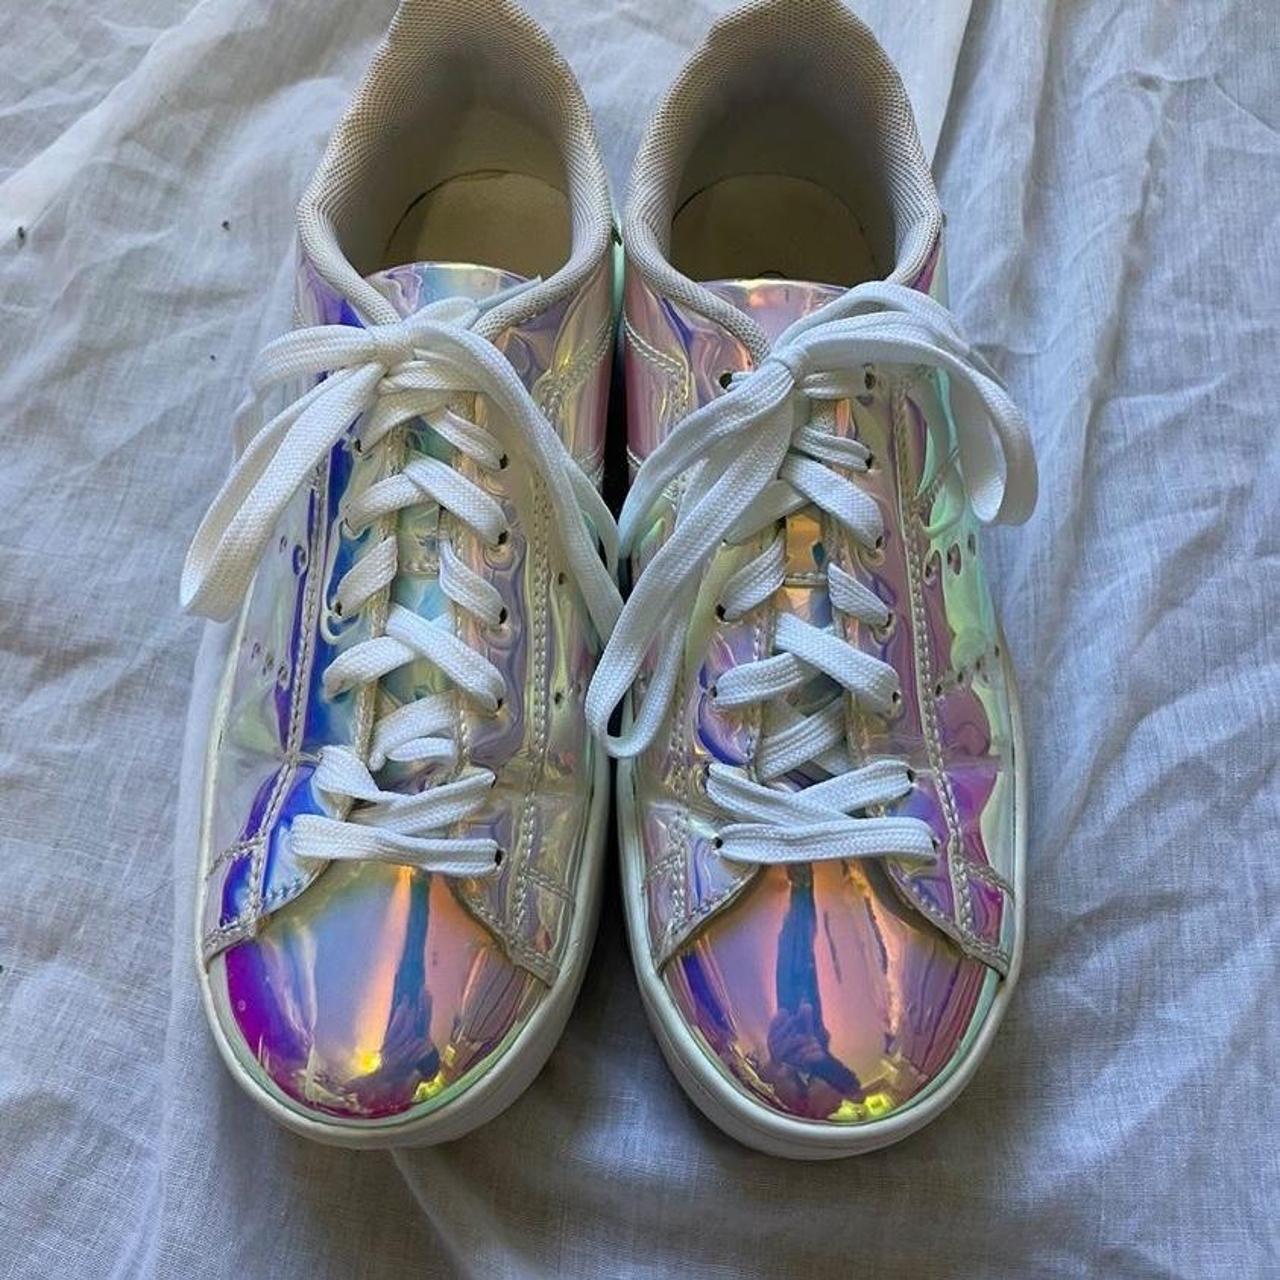 Product Image 1 - 2 INCH Holographic Platforms 

PLEASE